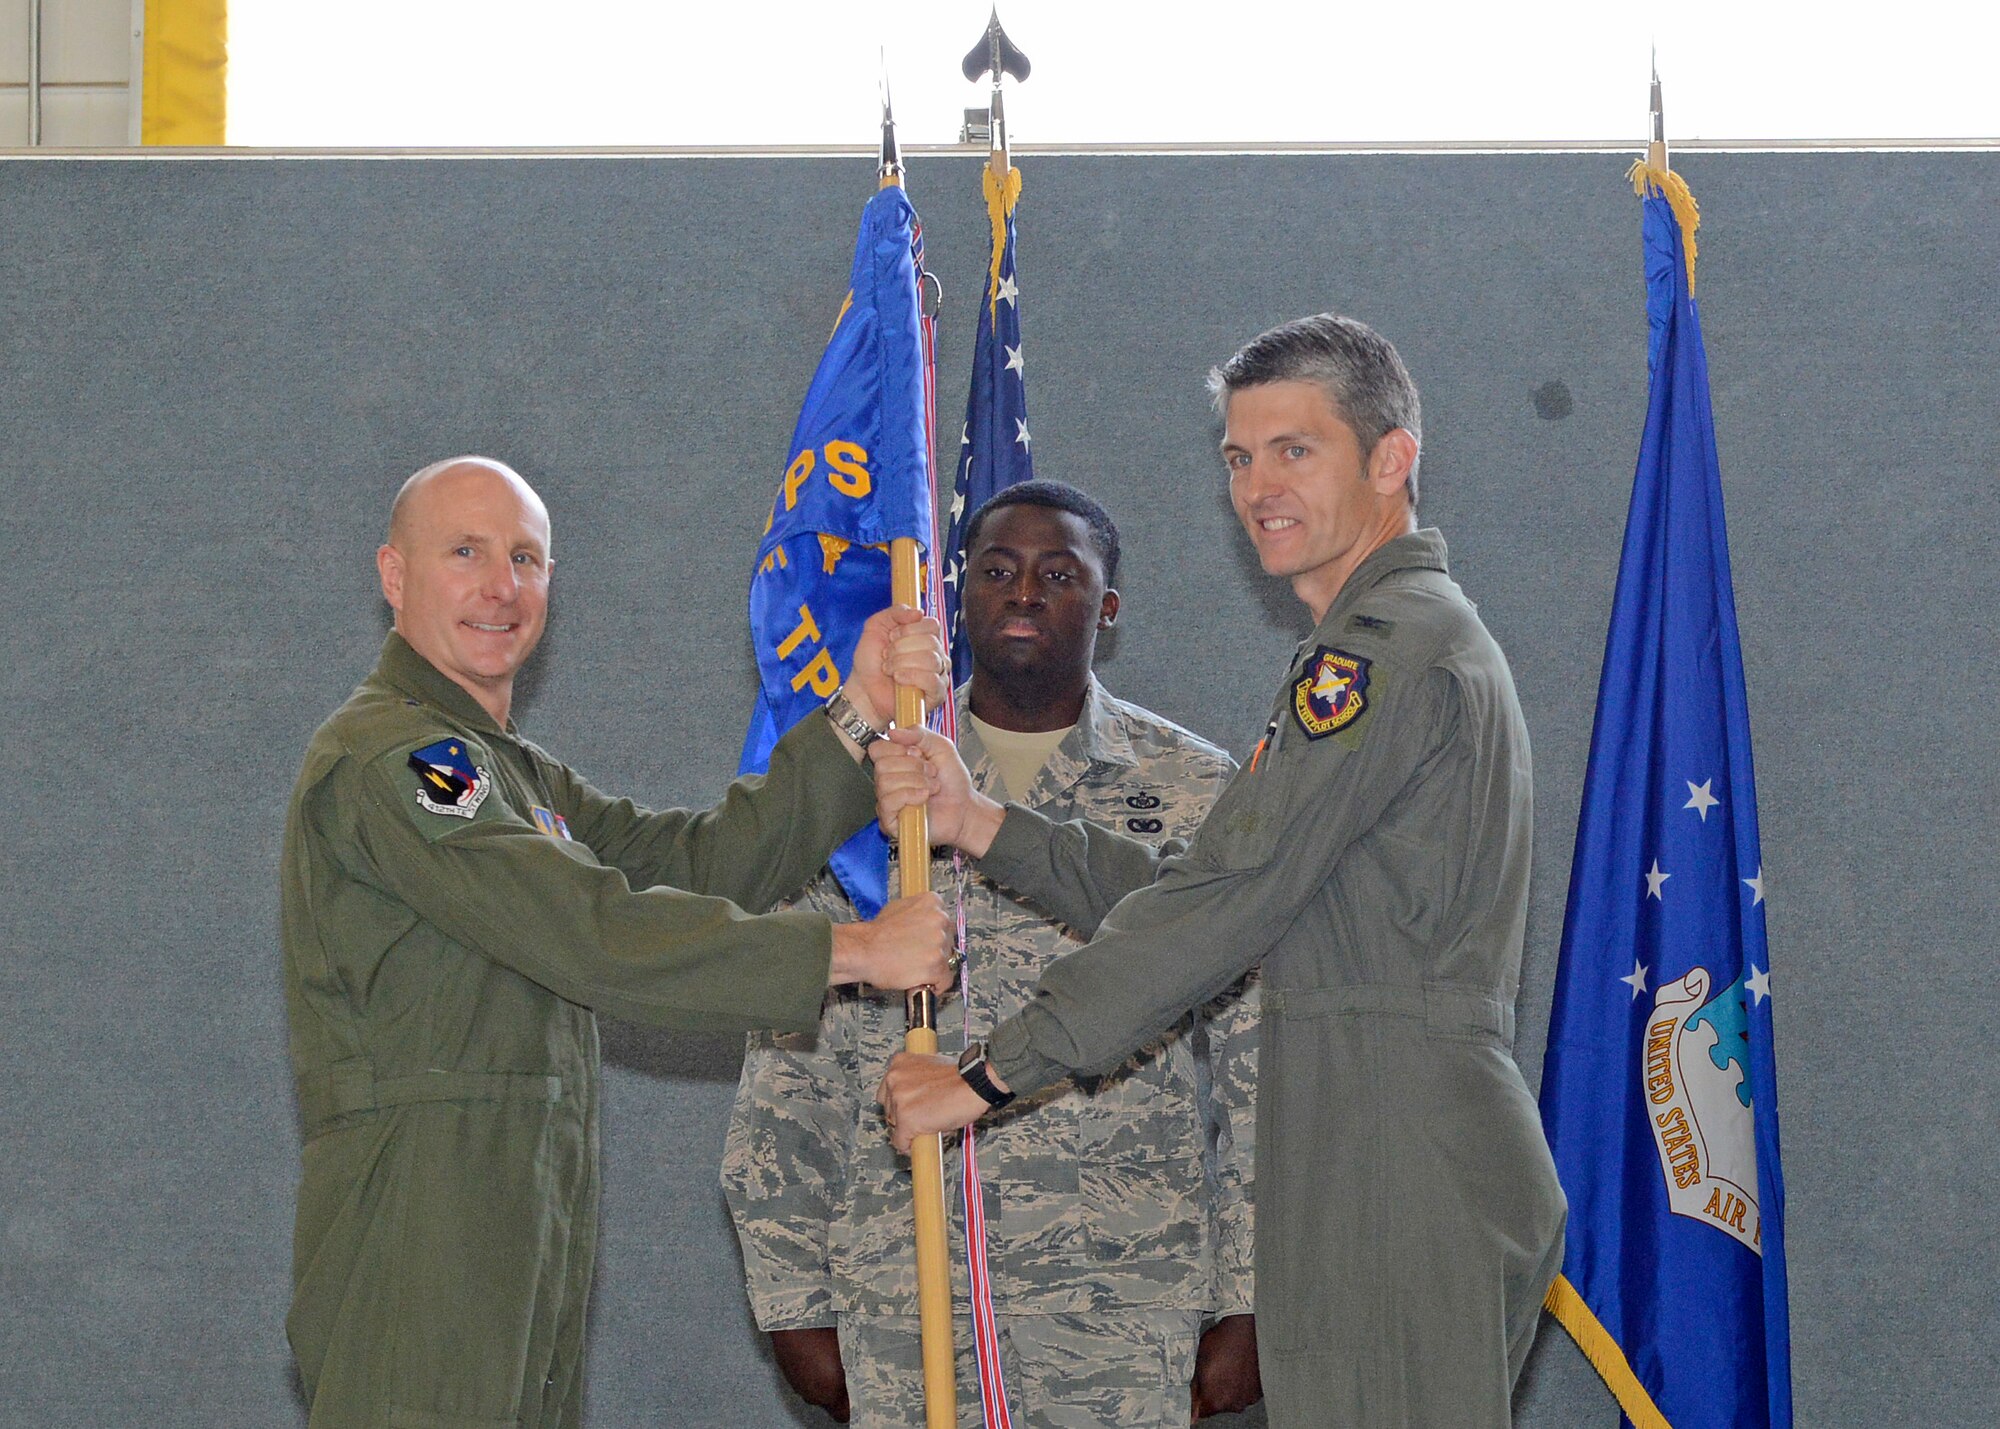 Brig. Gen. Carl Schaefer, 412th Test Wing commander (left), and new U.S. Air Force Test Pilot School commandant, Col. Ryan Blake, pose with the school’s guidon during a change of command ceremony in Hangar 1207 July 10. (U.S. Air Force photo by Kenji Thuloweit)